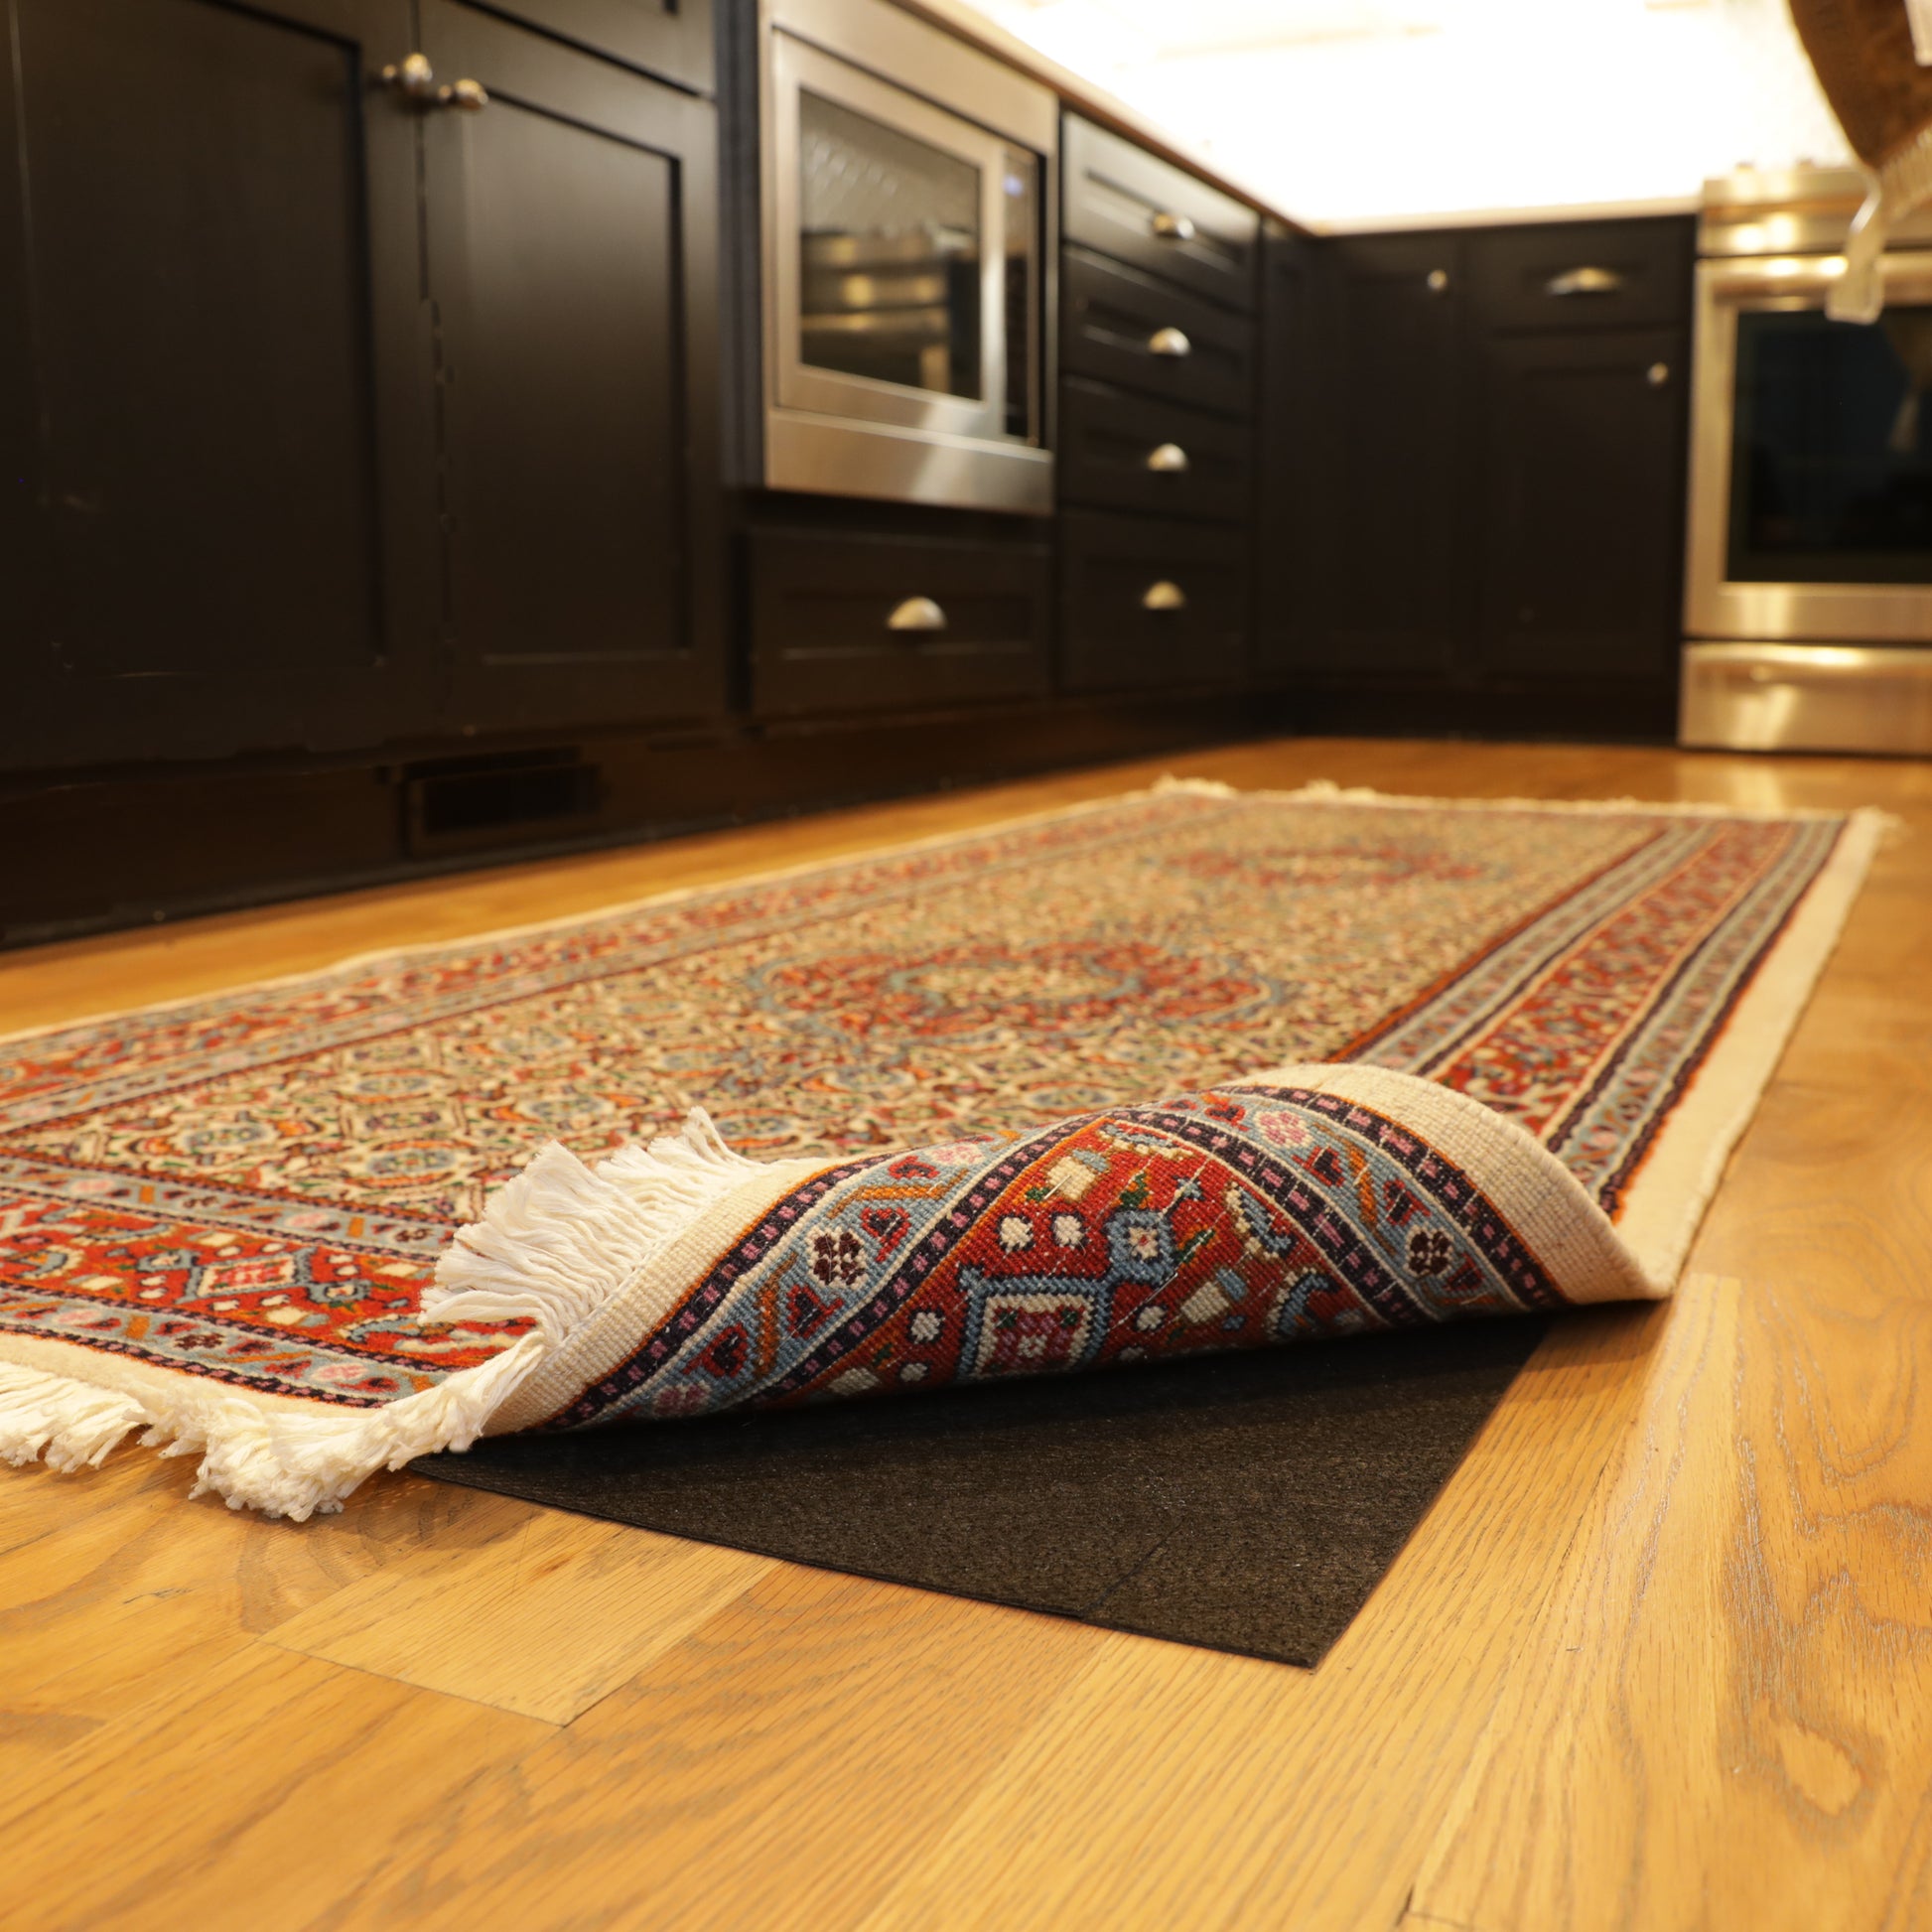 Grip-It Outdoor Non-Slip Rug Pad for Hardwood Floors, USA-Made